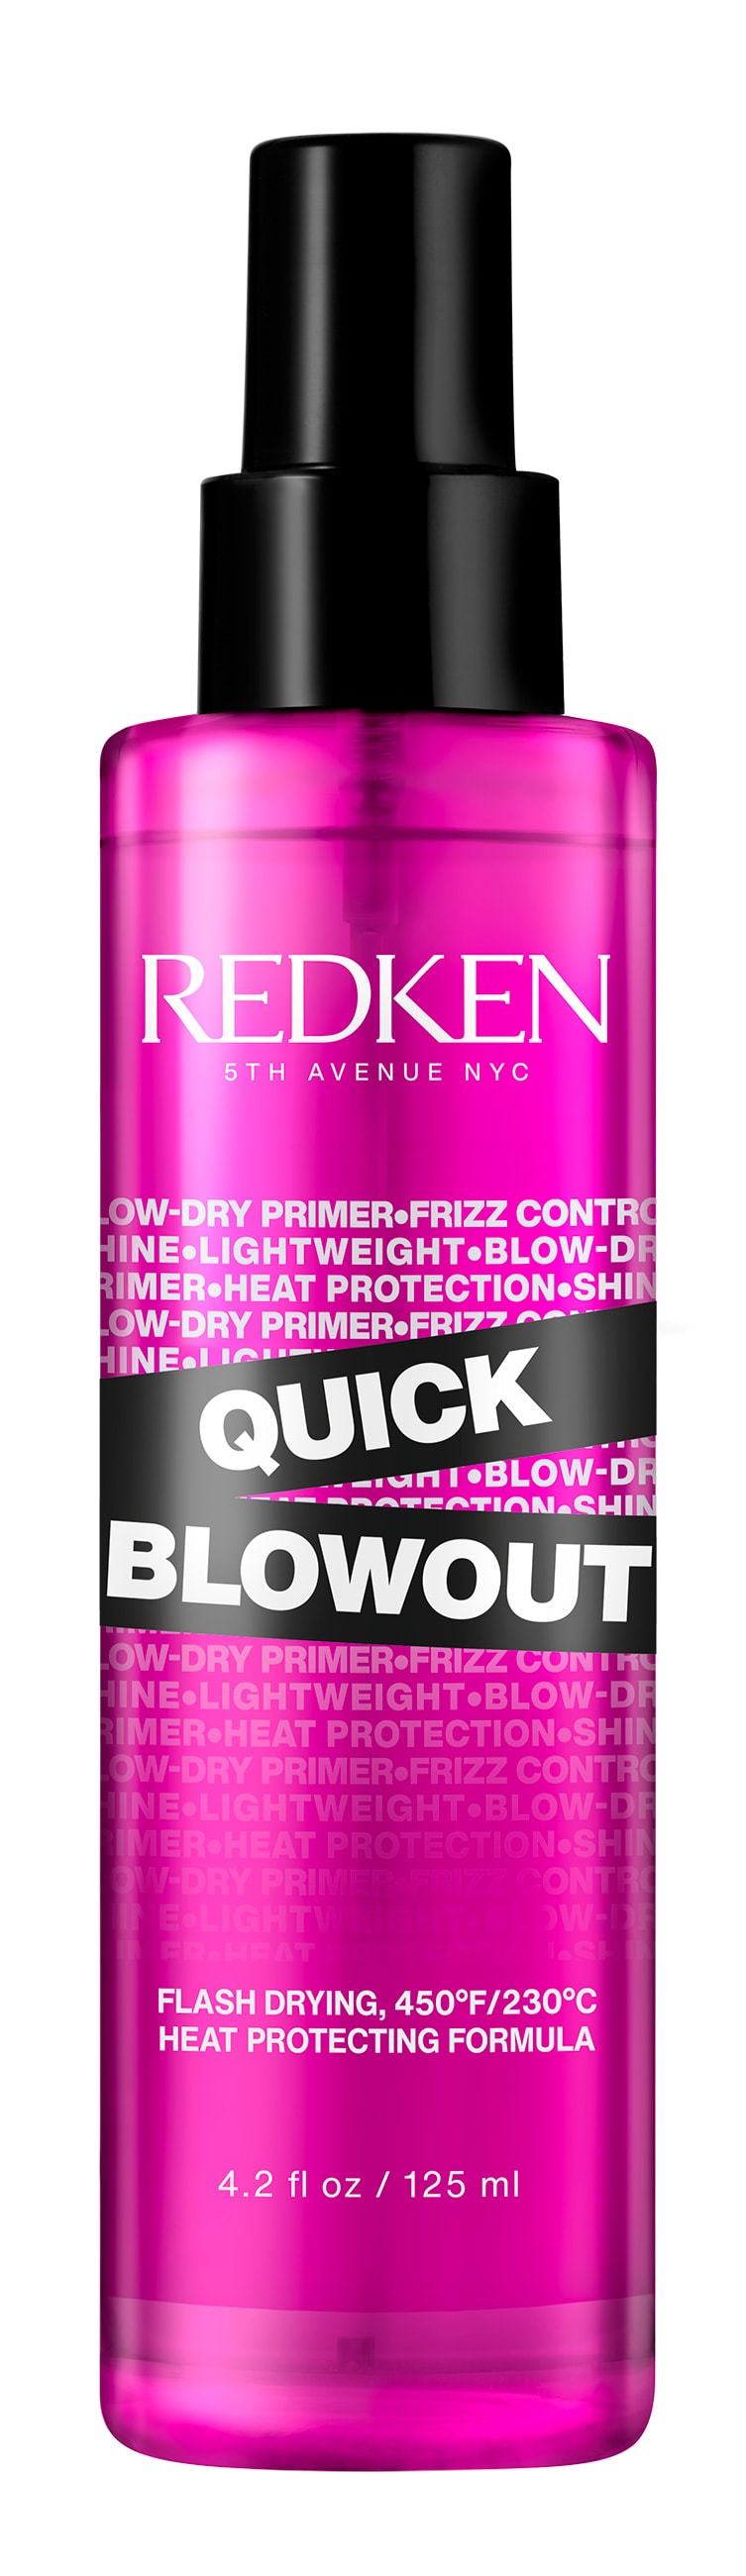 The Redken Guide to the Perfect Blowout!